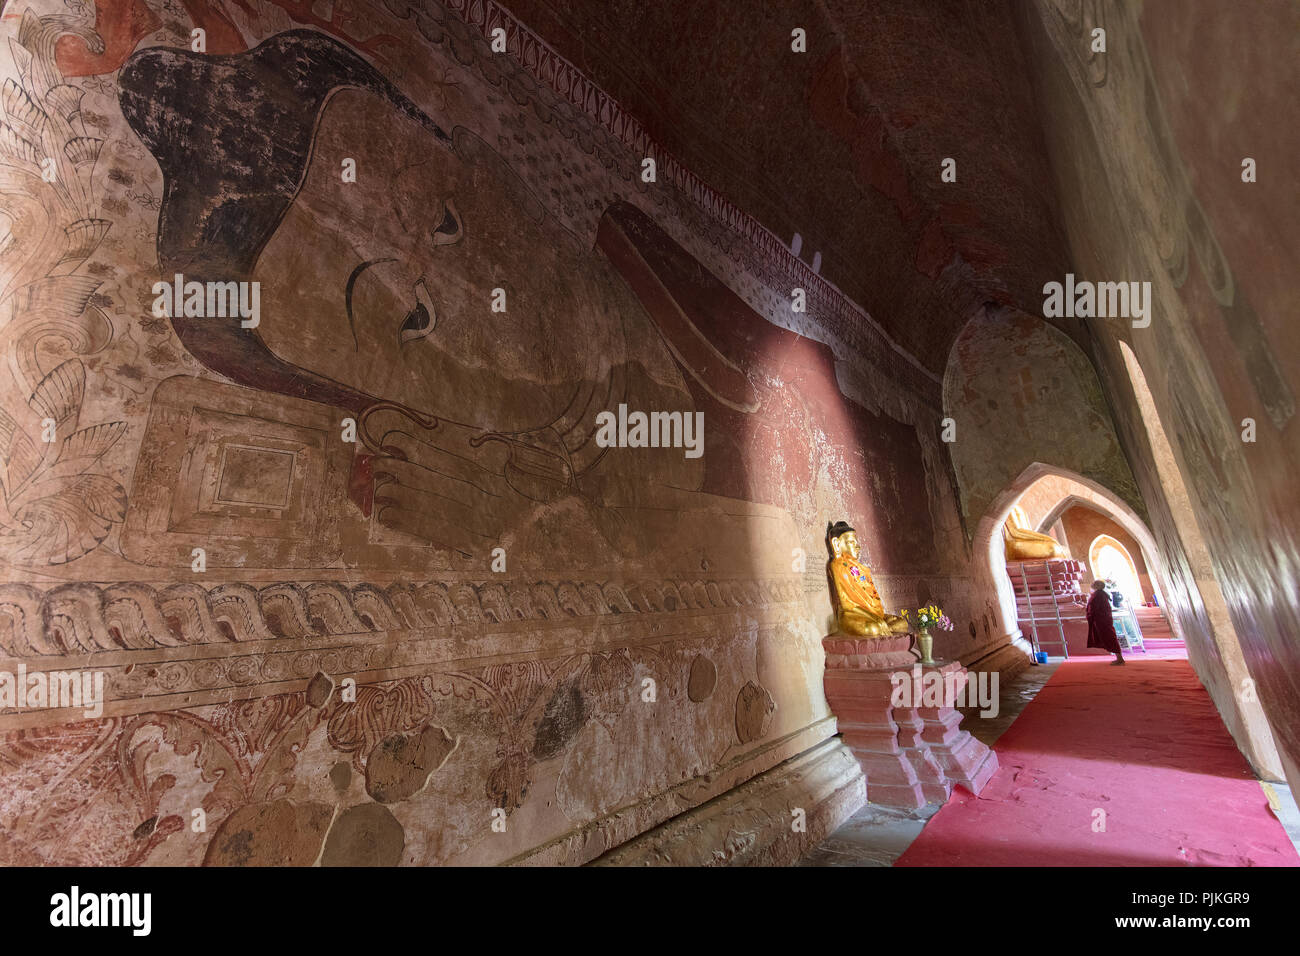 Detail of frescoes and a reclined Buddha inside the 'Sulamani Temple'. Minnanthu village, southwest of Bagan, Myanmar (Burma). Stock Photo